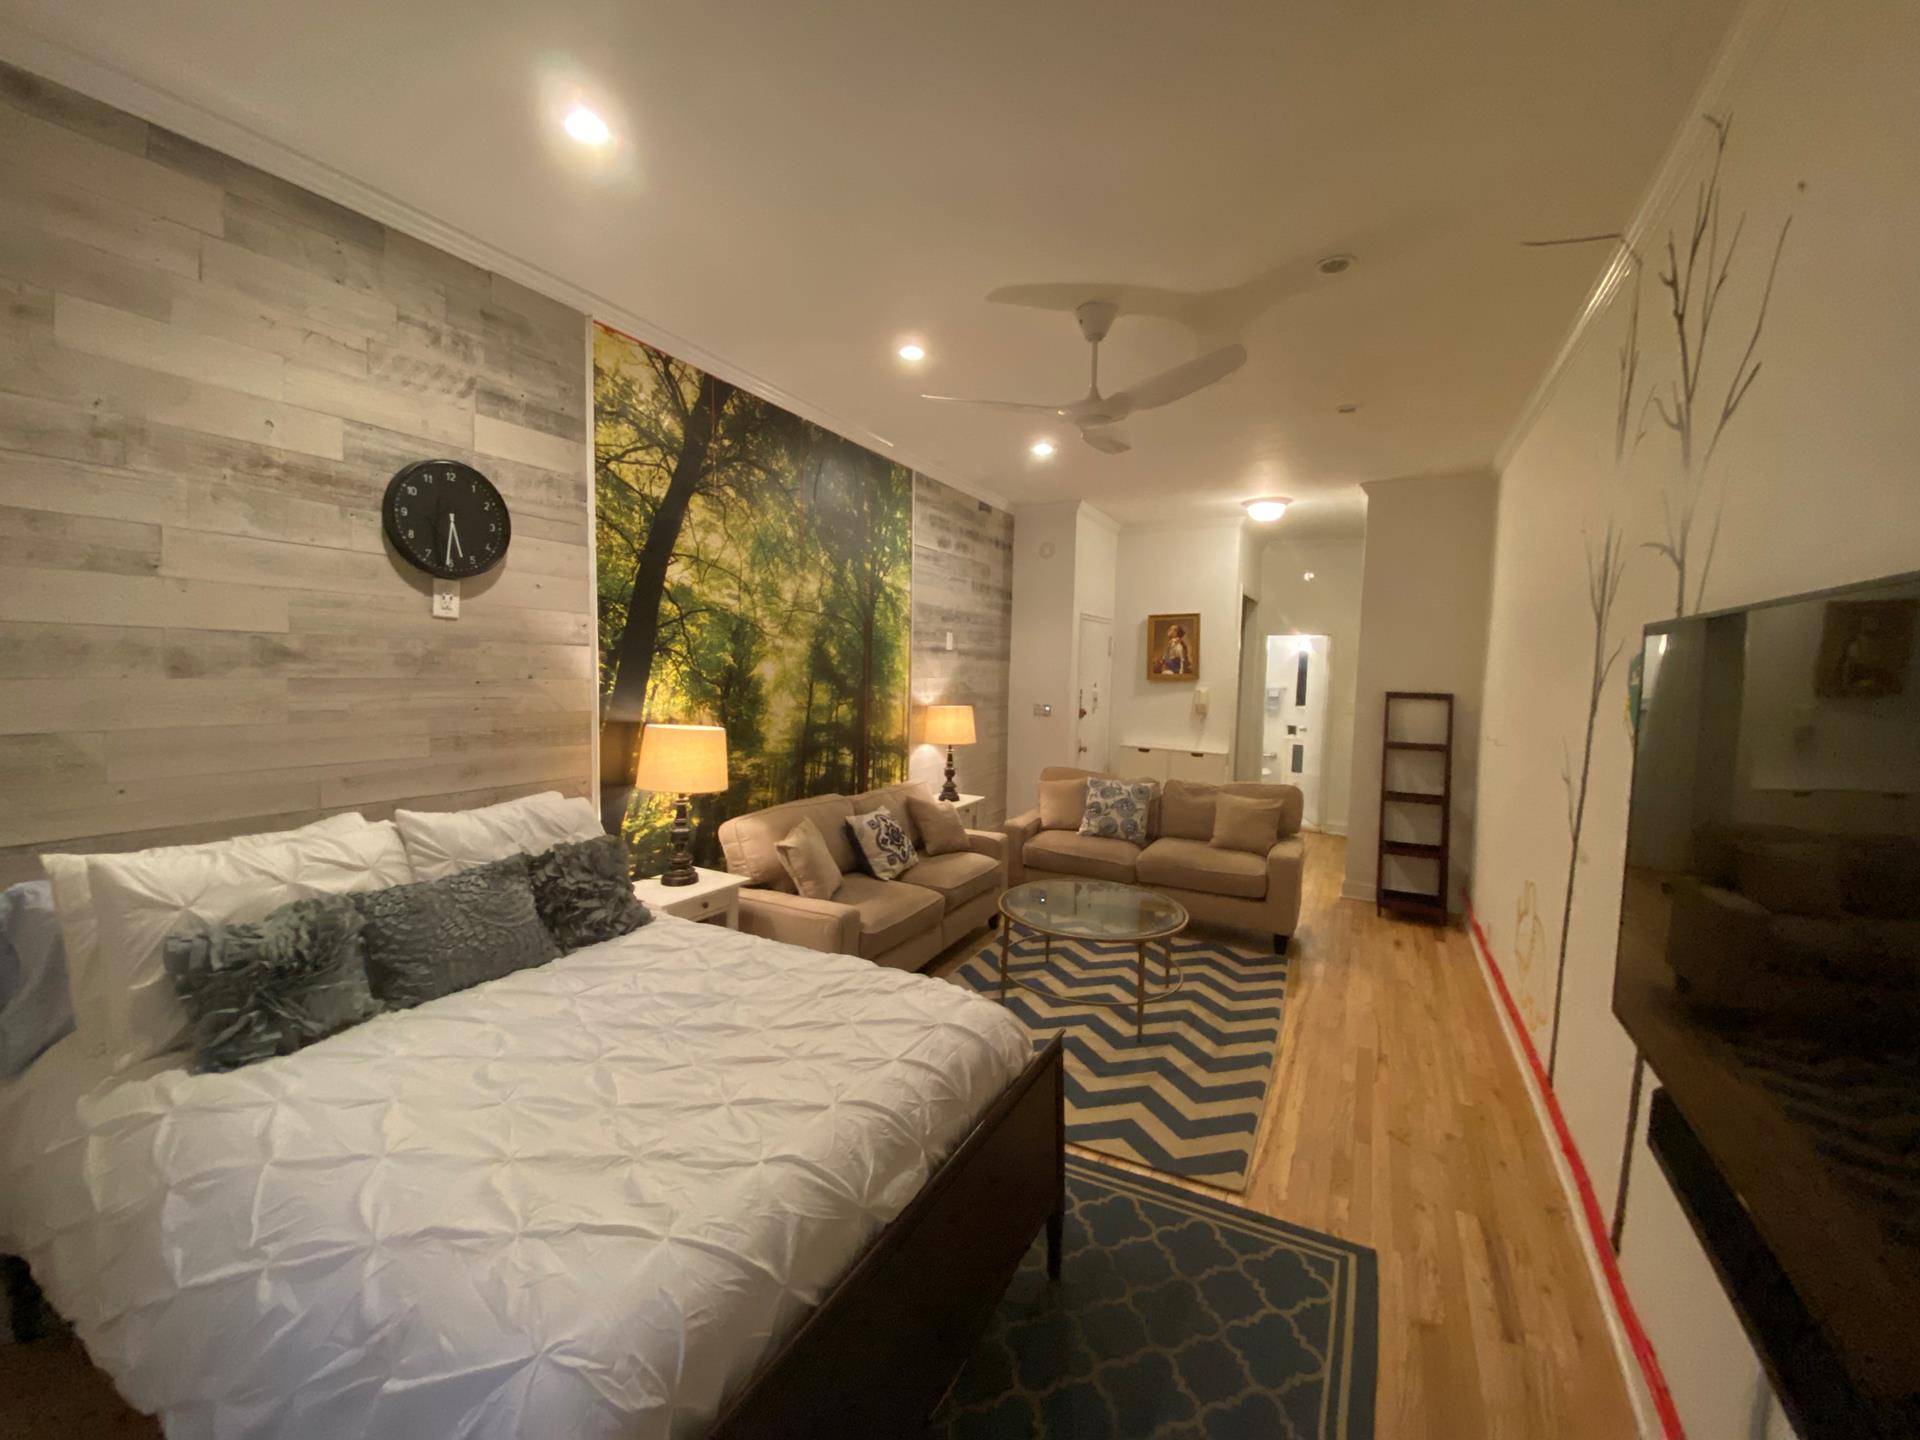 Back on the Market. Take advantage of the amazing private outdoor space 250 sf at this charming Upper East Side, pin drop quiet Studio in time for late Summer Fall ...